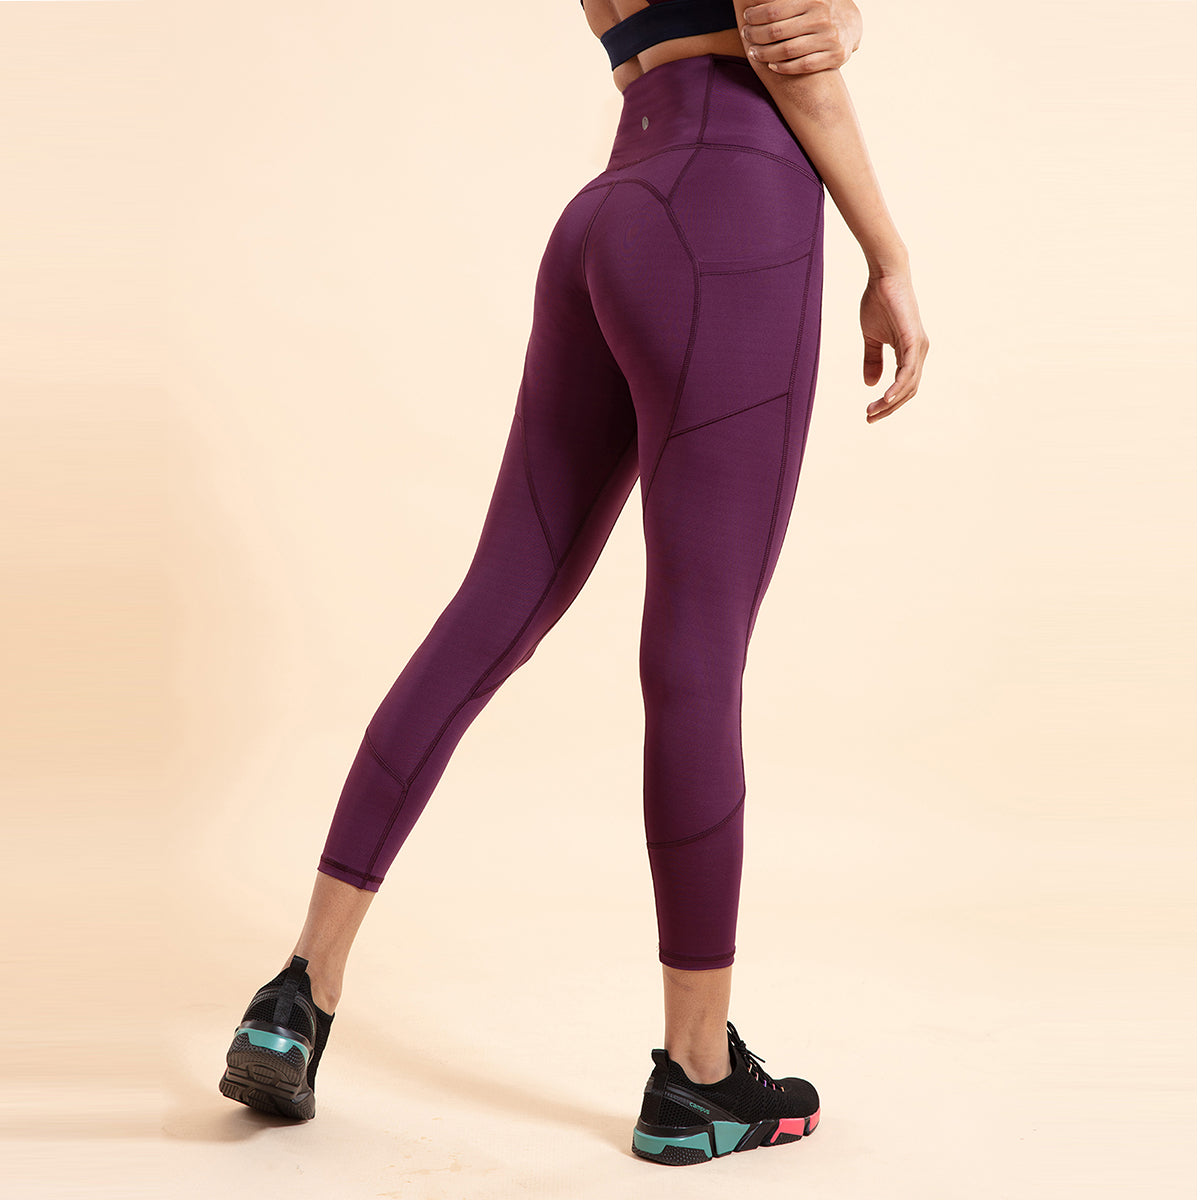 Nykd All Day High rise Classic Pannelled Leggings-NYK100 Potent purple + Pink yarrow